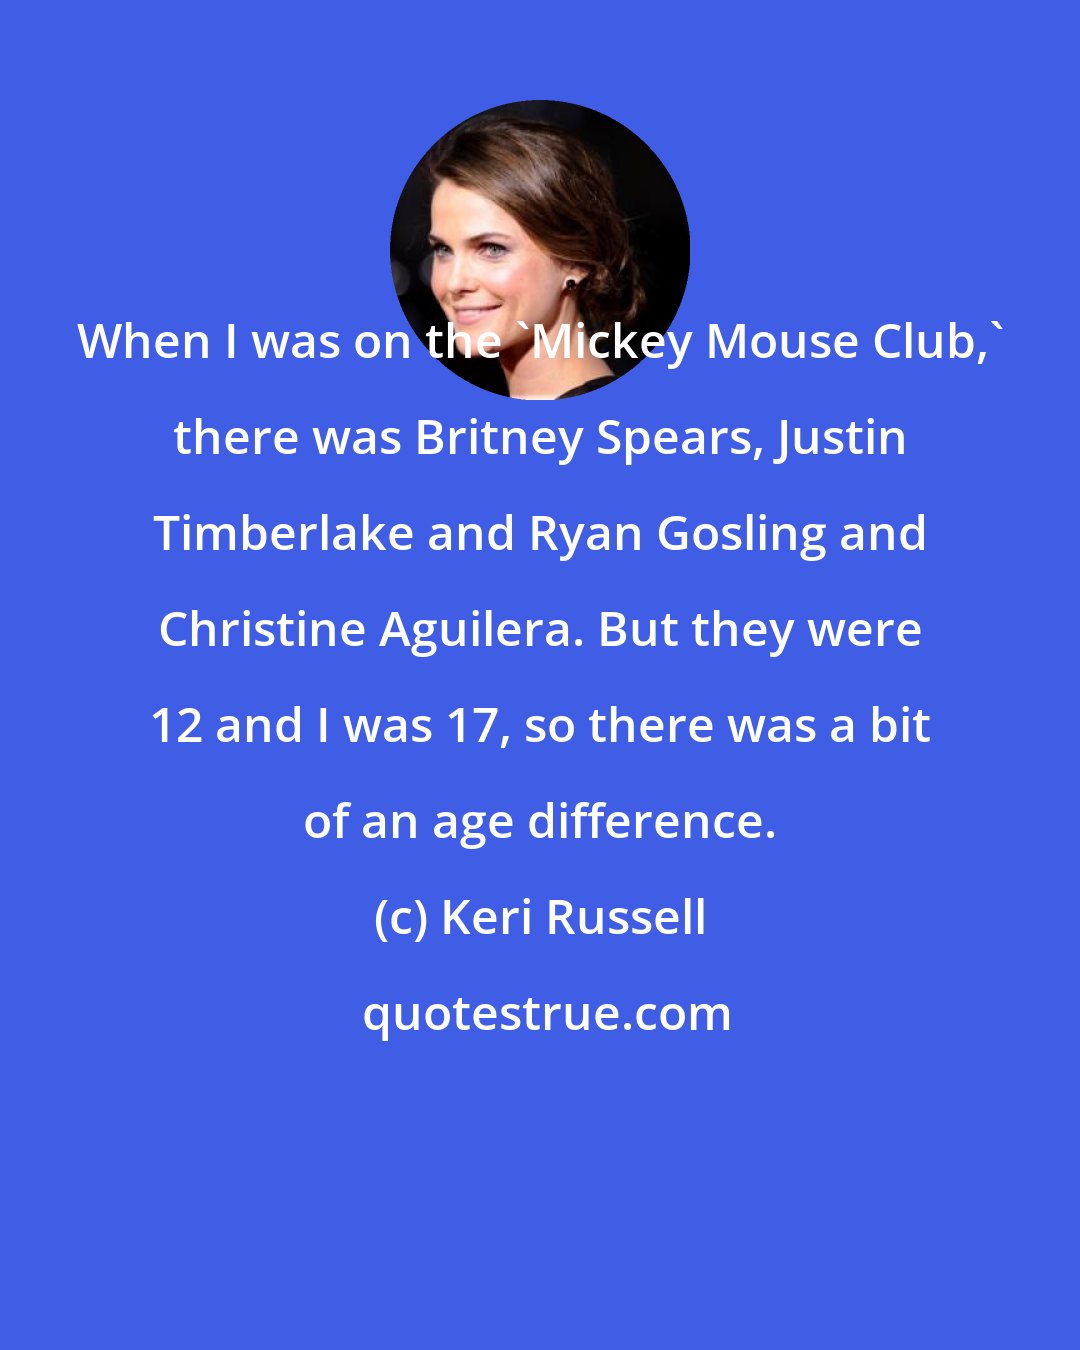 Keri Russell: When I was on the 'Mickey Mouse Club,' there was Britney Spears, Justin Timberlake and Ryan Gosling and Christine Aguilera. But they were 12 and I was 17, so there was a bit of an age difference.